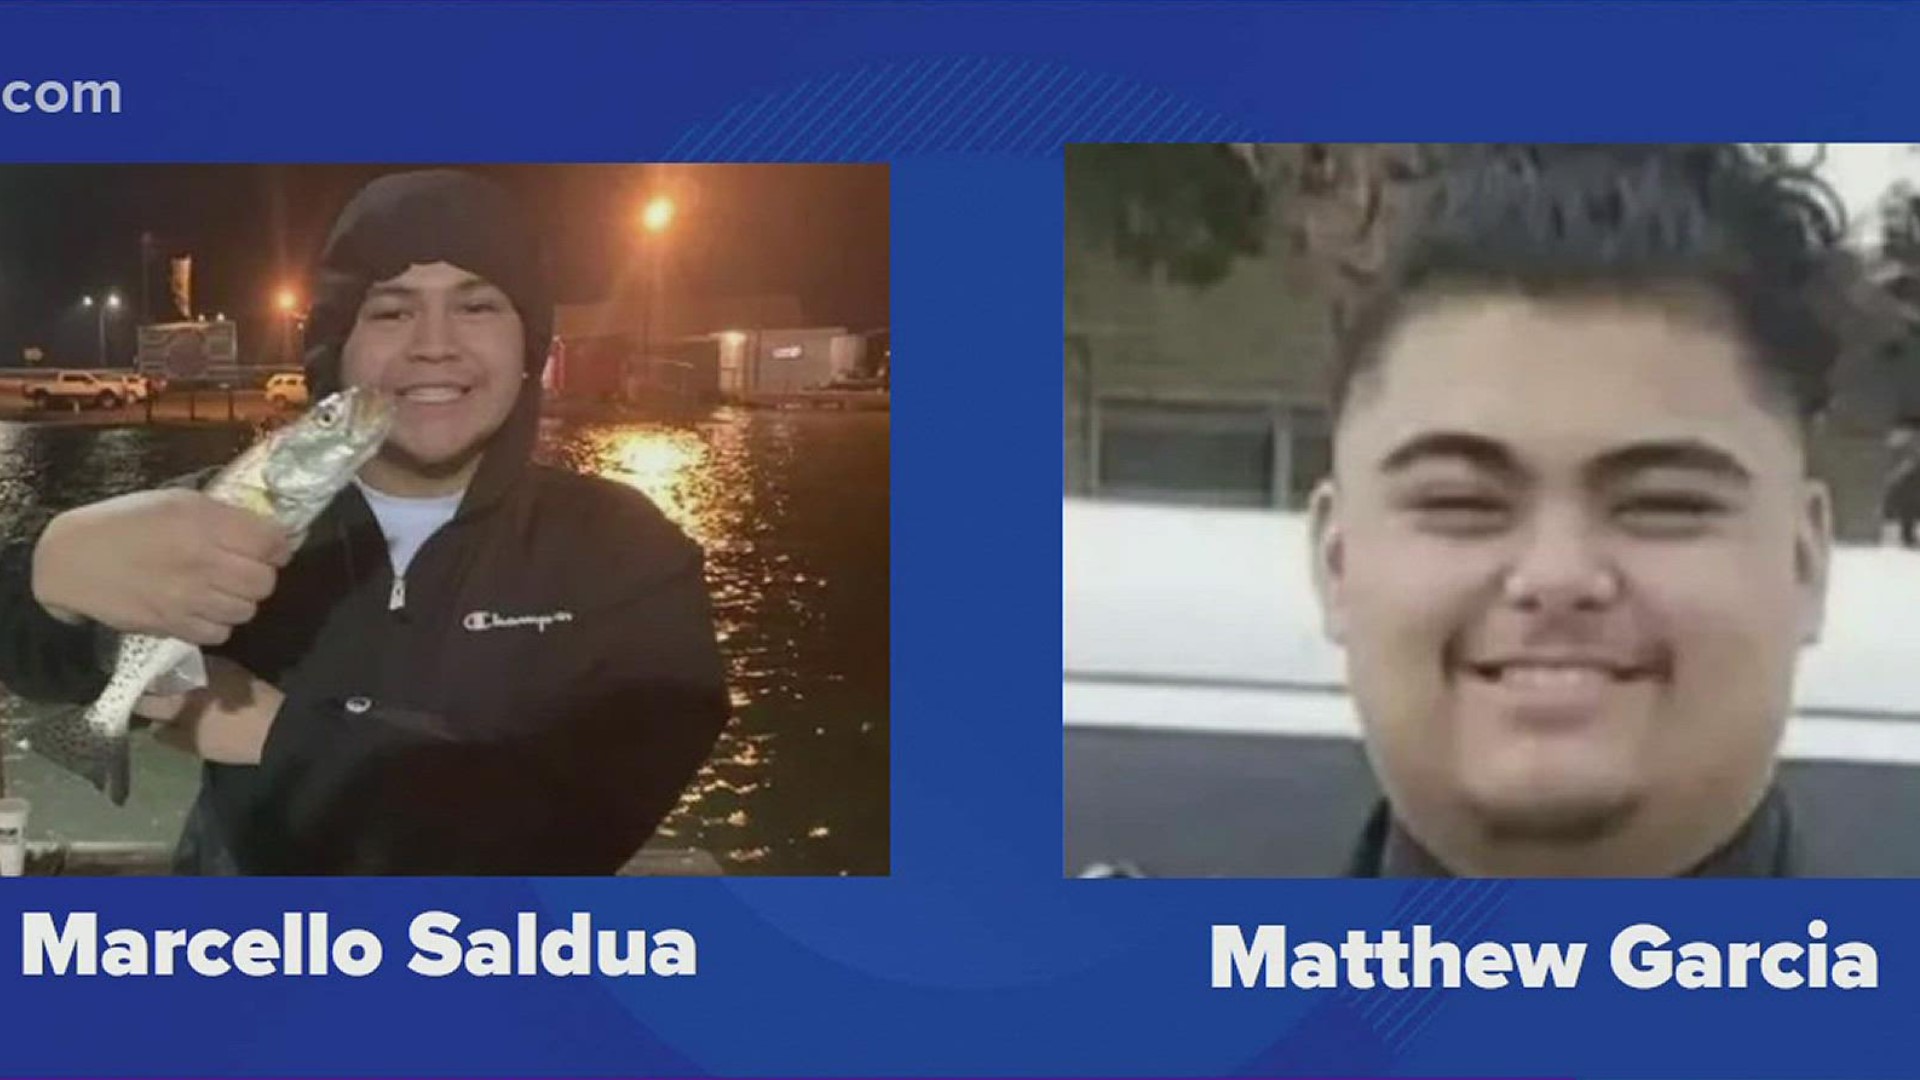 3News' Reporter went live at the vigil that was being held for the two Ray High School students who lost their lives in a deadly car crash.